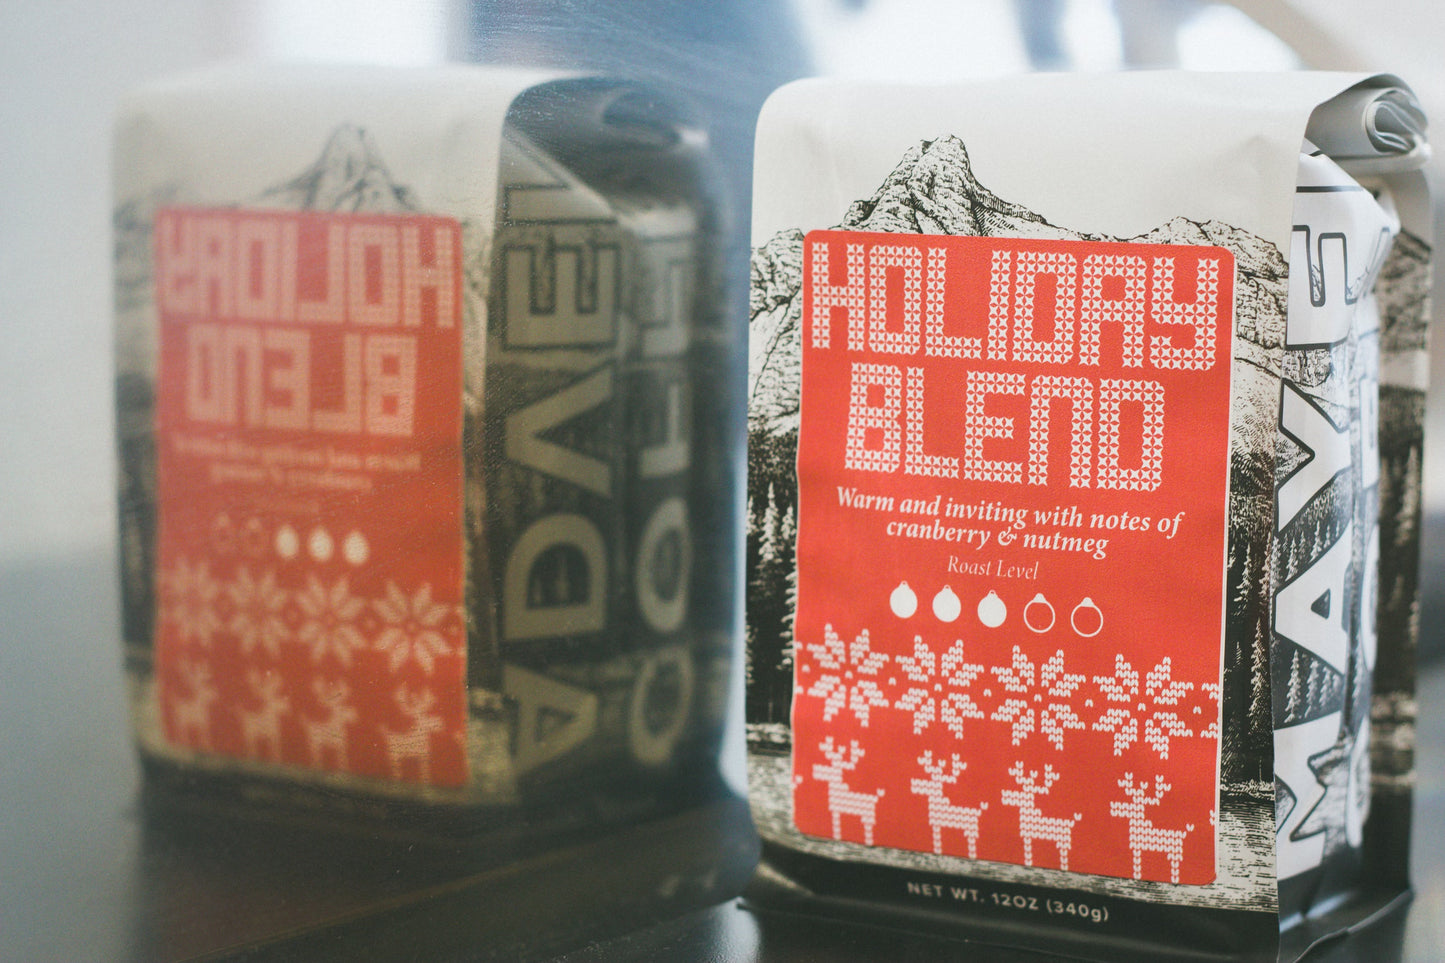 HOLIDAY BLEND